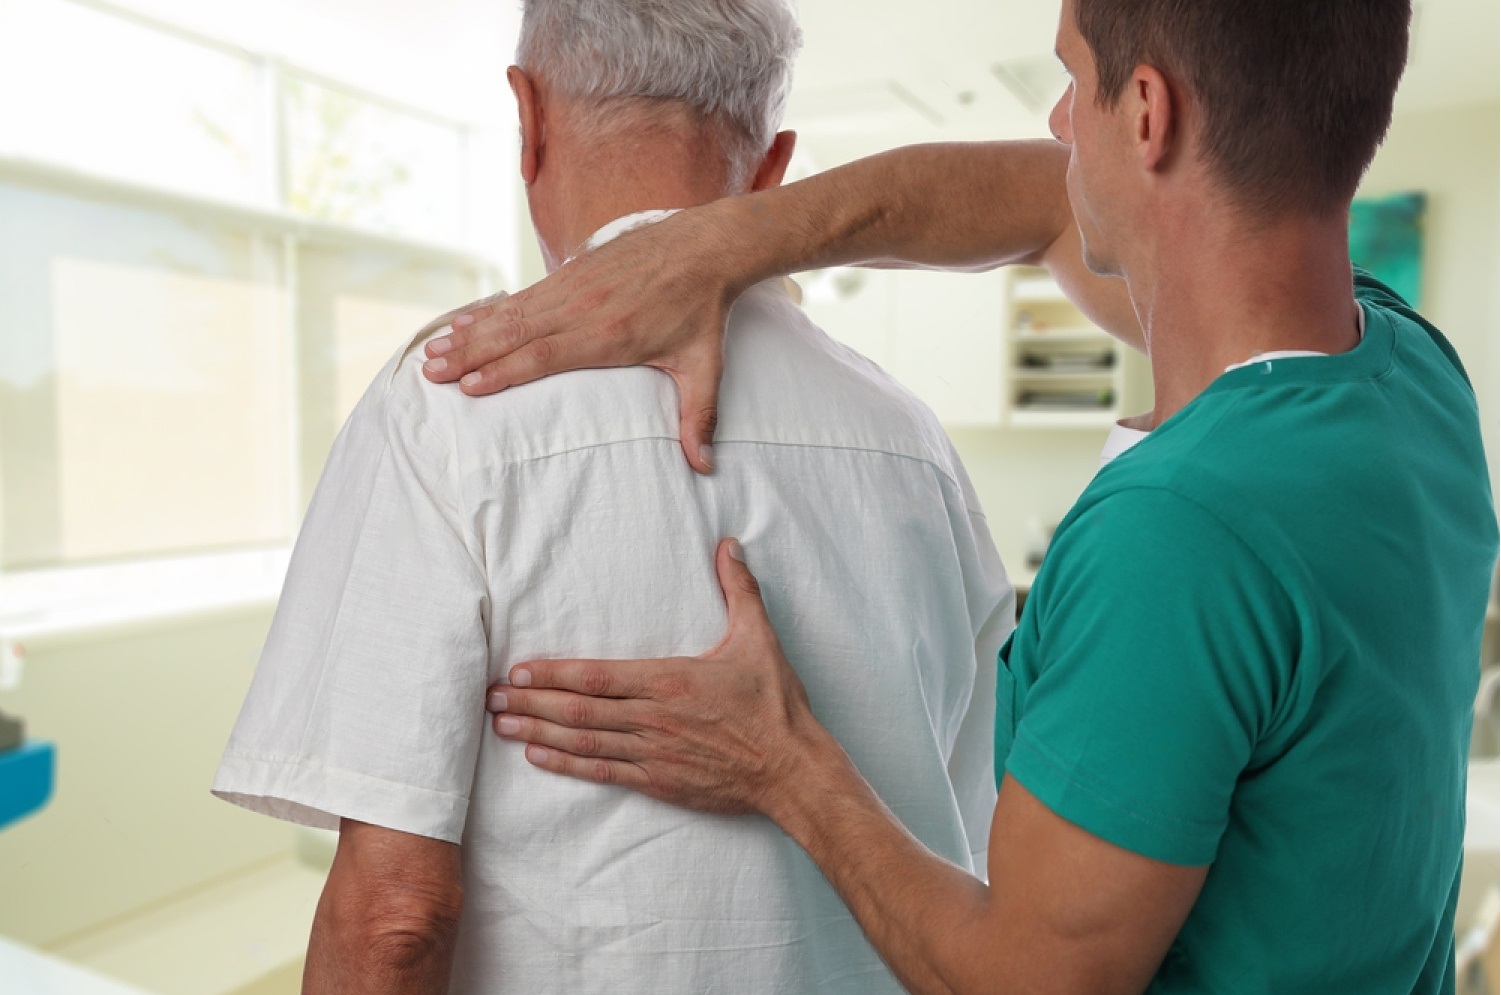 Physiotherapy for shoulder pain